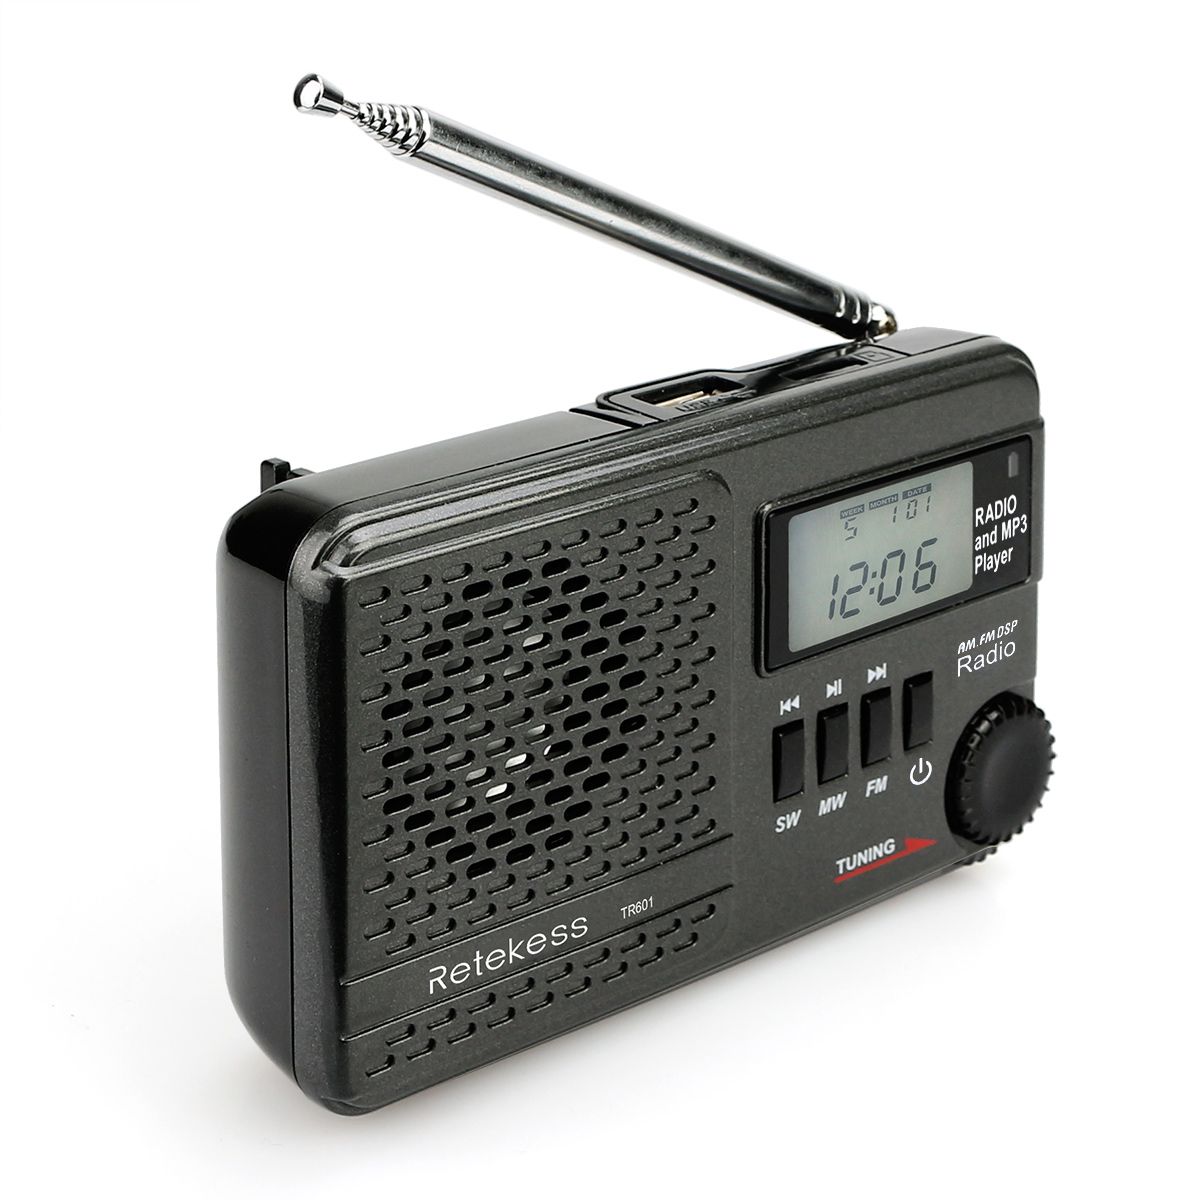 Retekess-F9216A-TR601-Digital-Display-Radio-with-FM-AM-for-Family-Camping-Outdoor-1451974